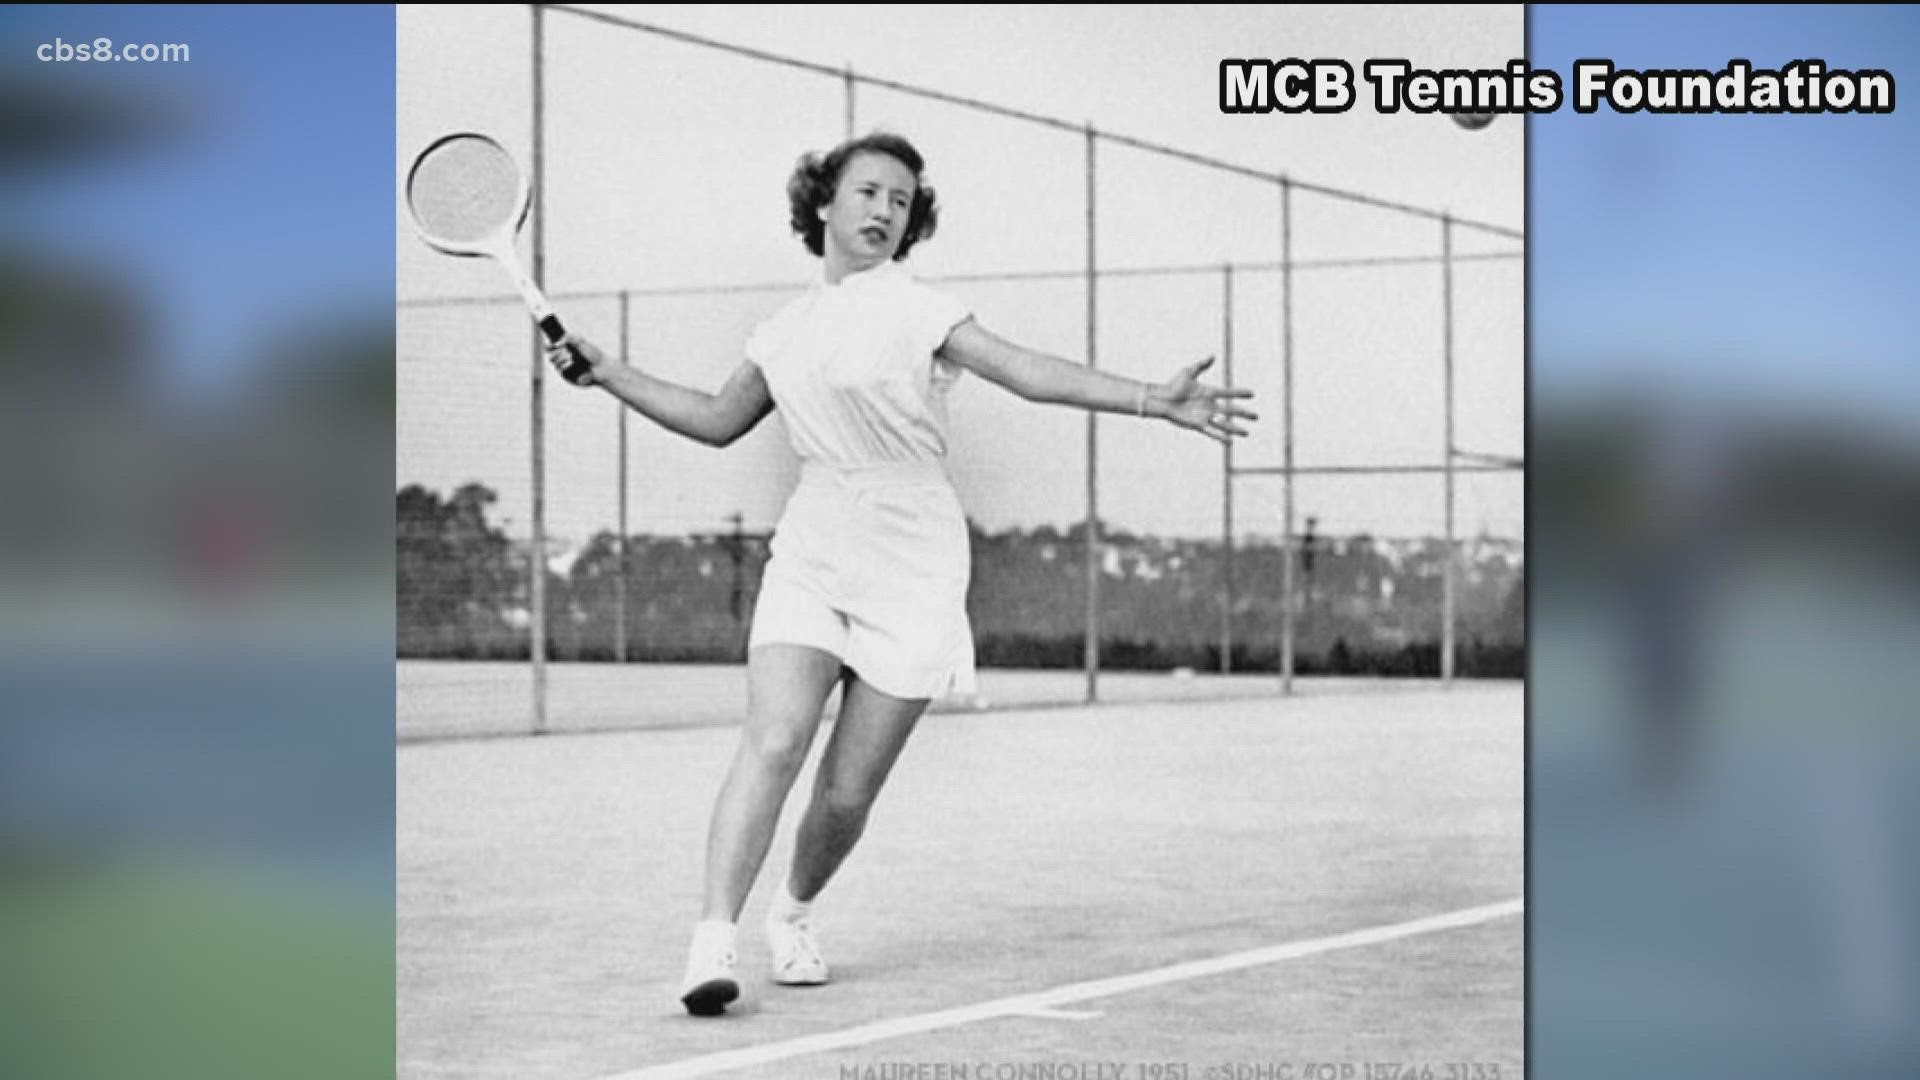 The San Diego native dominated world tennis in the early 1950s before a tragic accident forced her to retire.